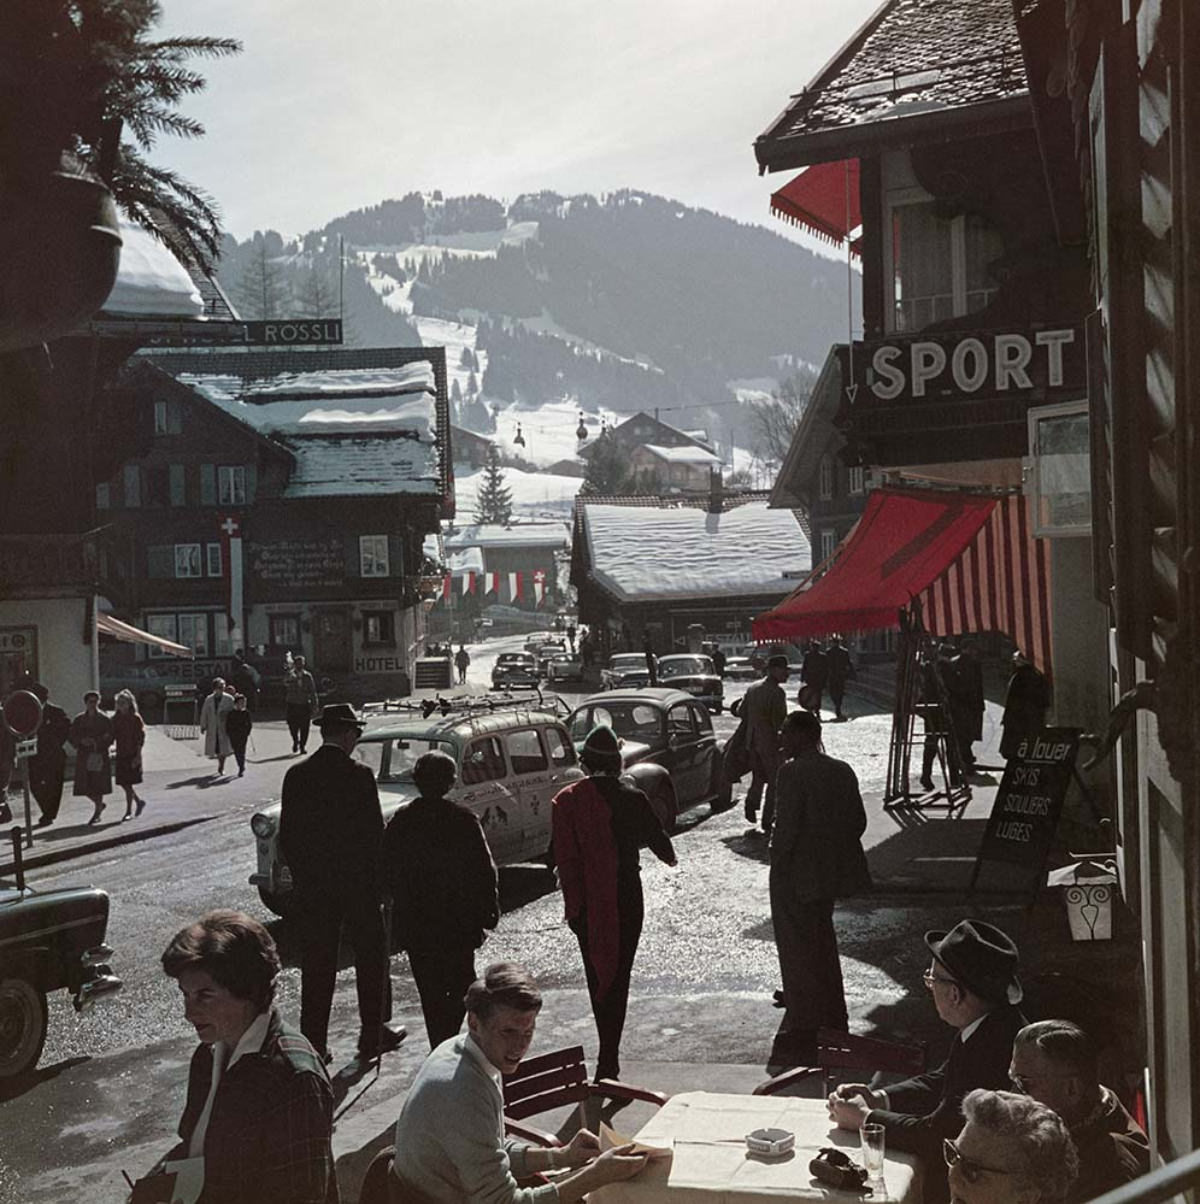 The town centre at the ski resort of Gstaad, Switzerland, 1961.